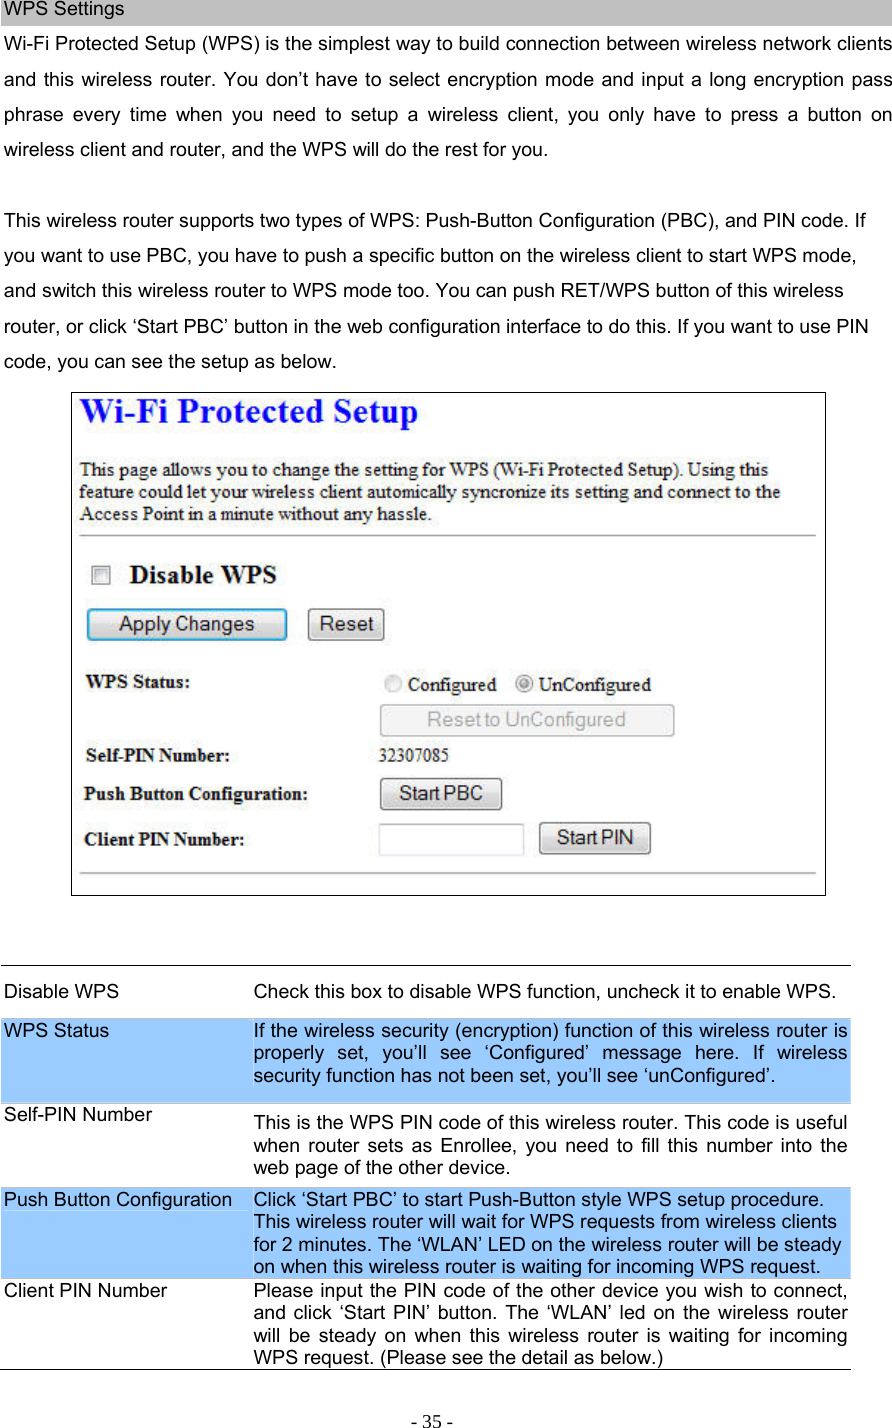 - 35 - WPS Settings Wi-Fi Protected Setup (WPS) is the simplest way to build connection between wireless network clients and this wireless router. You don’t have to select encryption mode and input a long encryption pass phrase every time when you need to setup a wireless client, you only have to press a button on wireless client and router, and the WPS will do the rest for you.  This wireless router supports two types of WPS: Push-Button Configuration (PBC), and PIN code. If you want to use PBC, you have to push a specific button on the wireless client to start WPS mode, and switch this wireless router to WPS mode too. You can push RET/WPS button of this wireless router, or click ‘Start PBC’ button in the web configuration interface to do this. If you want to use PIN code, you can see the setup as below.    Disable WPS  Check this box to disable WPS function, uncheck it to enable WPS. WPS Status  If the wireless security (encryption) function of this wireless router is properly set, you’ll see ‘Configured’ message here. If wireless security function has not been set, you’ll see ‘unConfigured’. Self-PIN Number  This is the WPS PIN code of this wireless router. This code is useful when router sets as Enrollee, you need to fill this number into the web page of the other device. Push Button Configuration  Click ‘Start PBC’ to start Push-Button style WPS setup procedure. This wireless router will wait for WPS requests from wireless clients for 2 minutes. The ‘WLAN’ LED on the wireless router will be steady on when this wireless router is waiting for incoming WPS request. Client PIN Number  Please input the PIN code of the other device you wish to connect, and click ‘Start PIN’ button. The ‘WLAN’ led on the wireless router will be steady on when this wireless router is waiting for incoming WPS request. (Please see the detail as below.) 